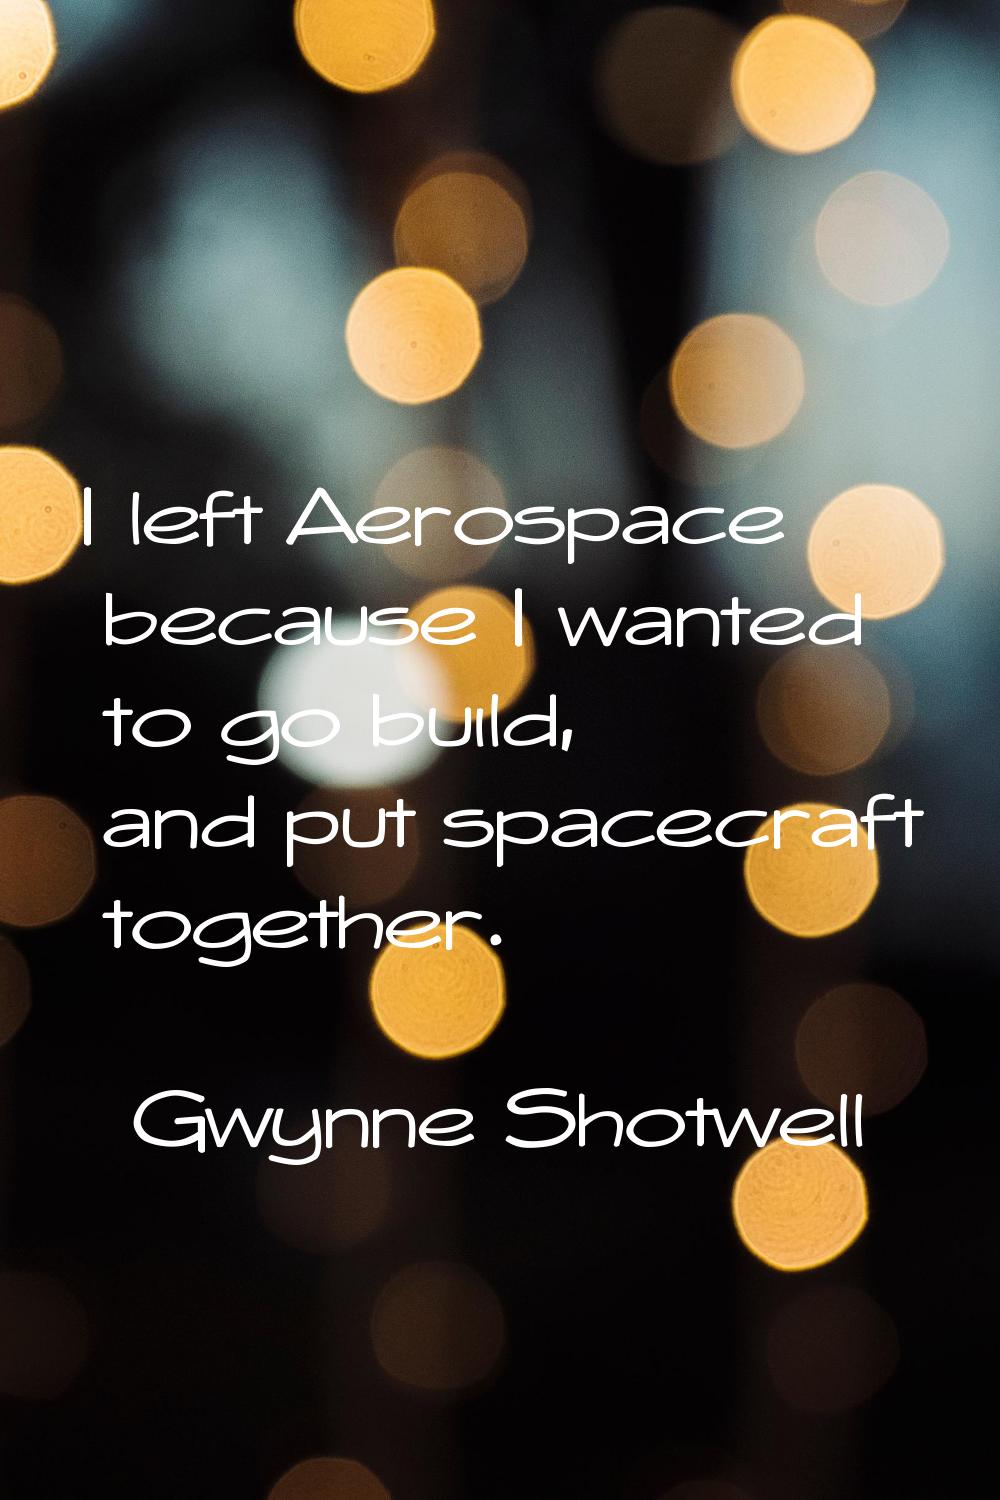 I left Aerospace because I wanted to go build, and put spacecraft together.